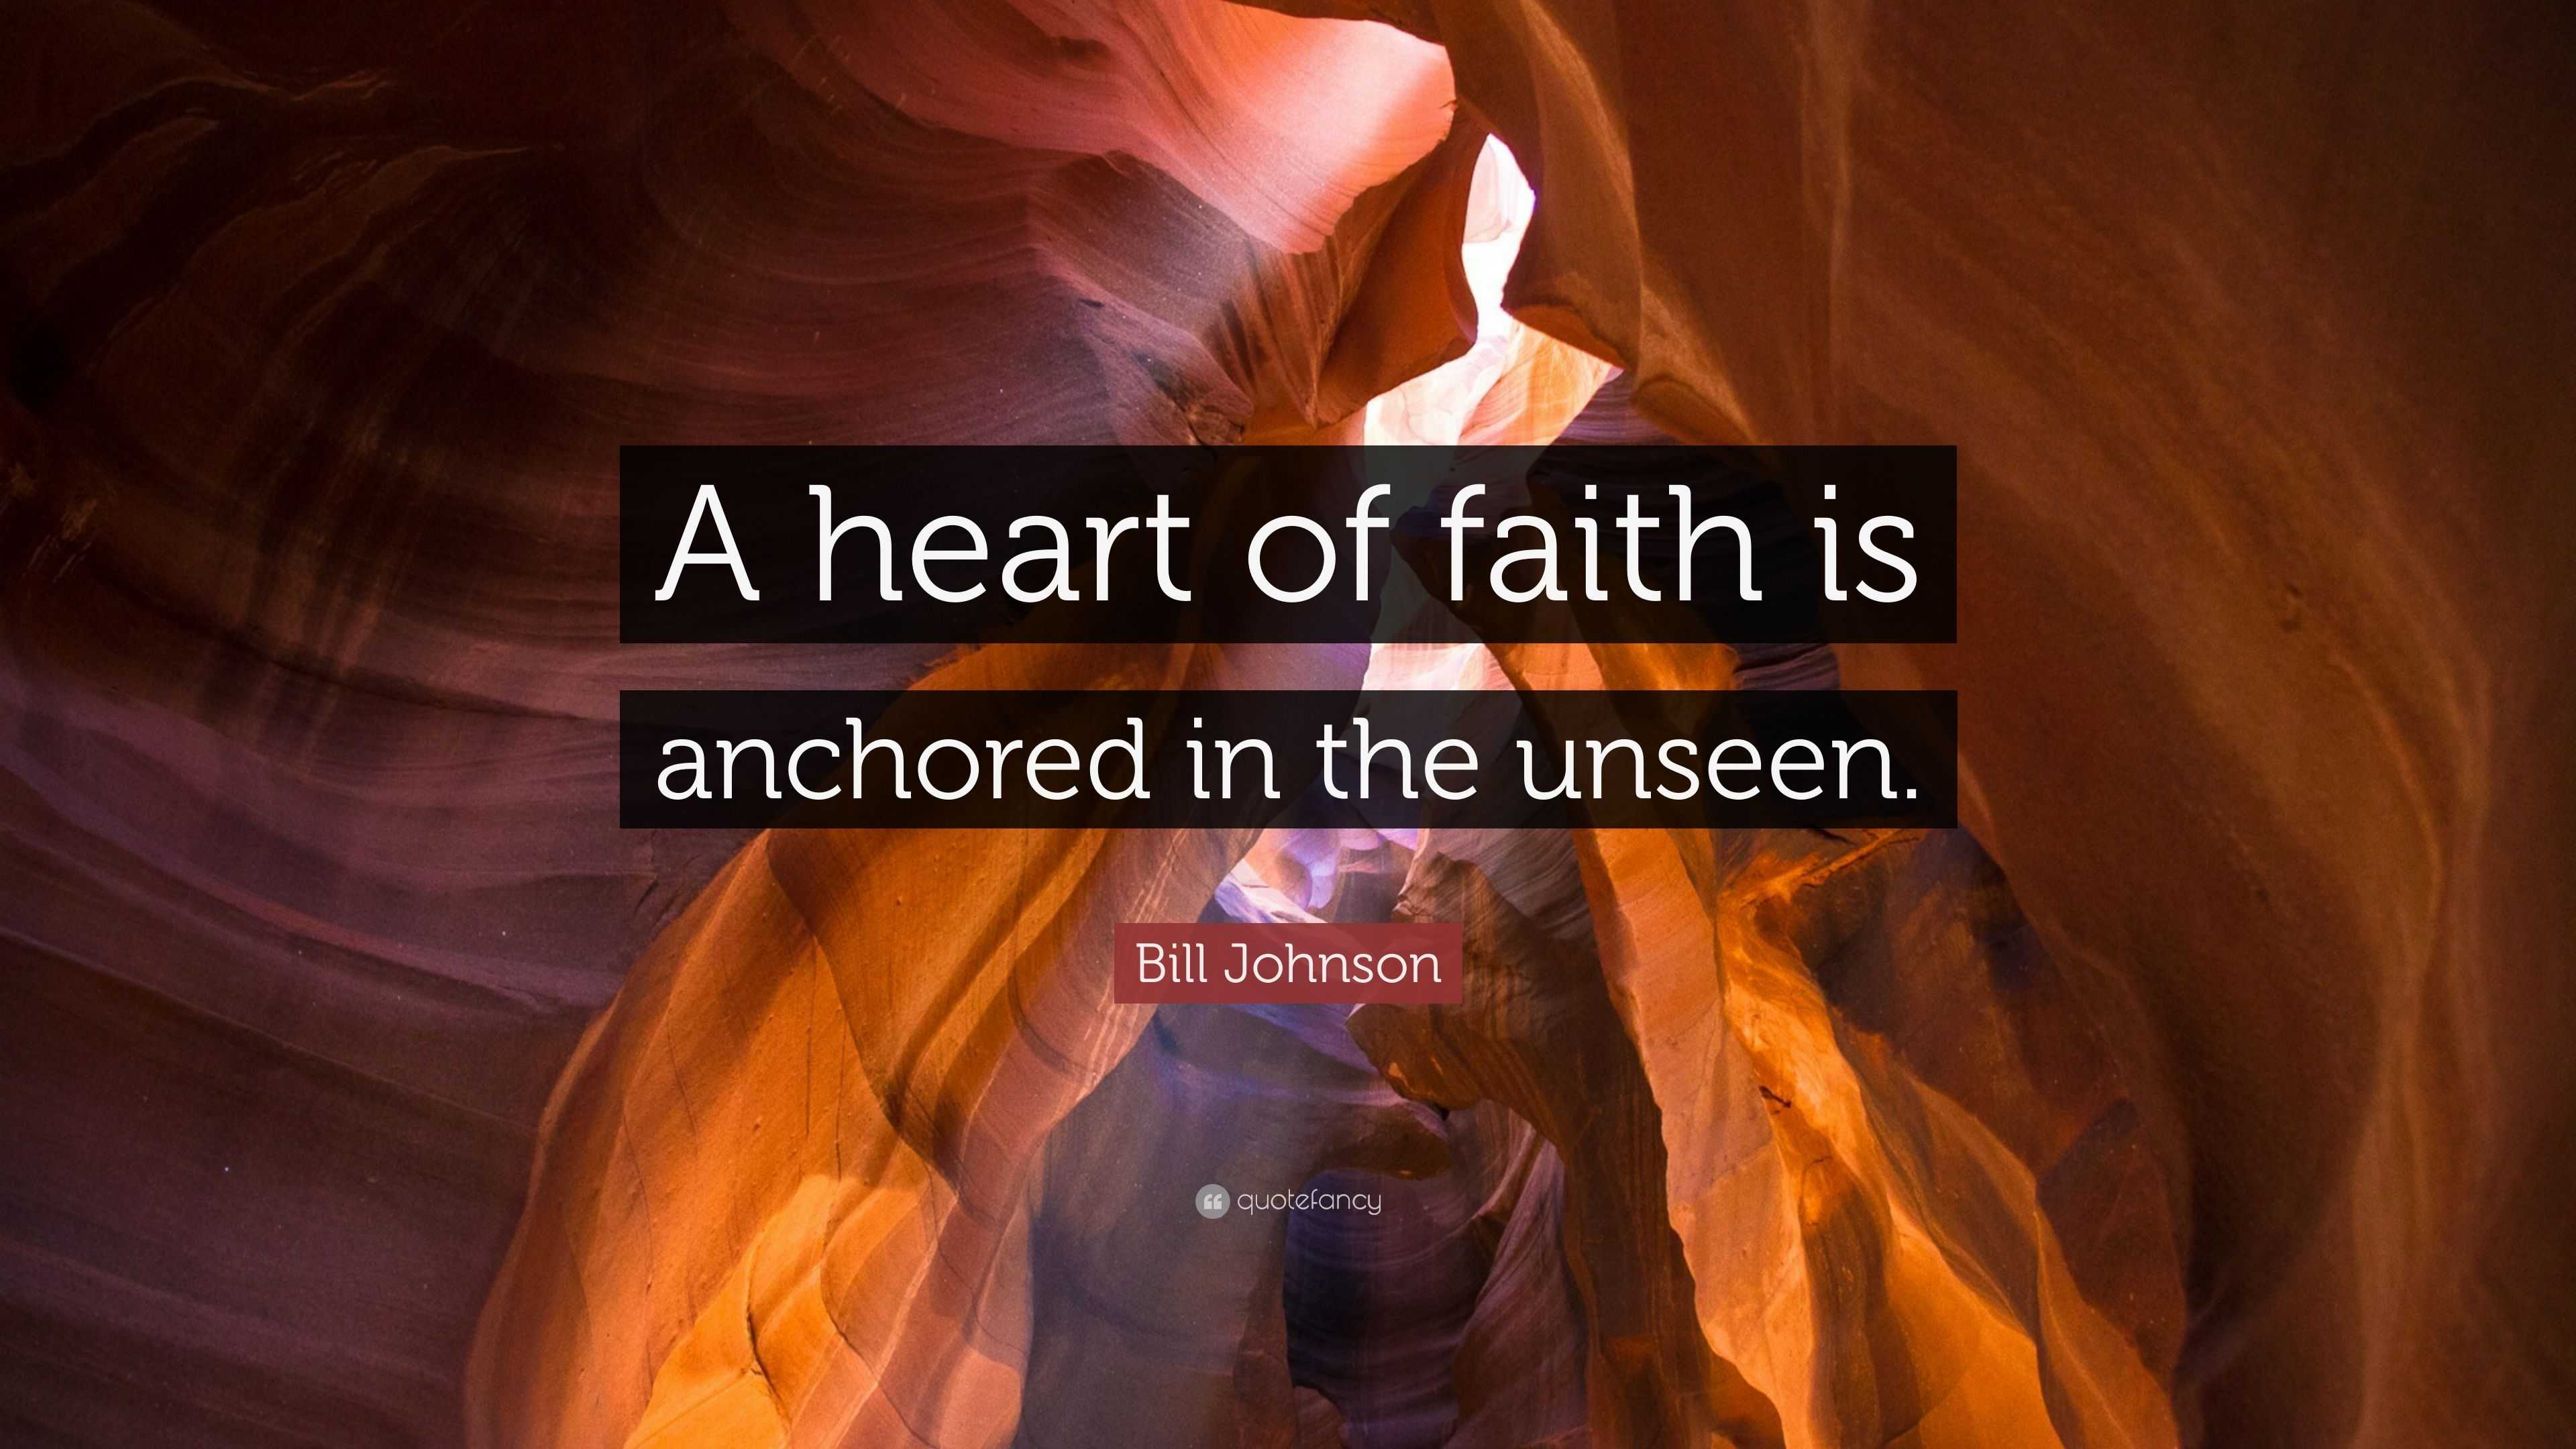 https://quotefancy.com/media/wallpaper/3840x2160/2428107-Bill-Johnson-Quote-A-heart-of-faith-is-anchored-in-the-unseen.jpg